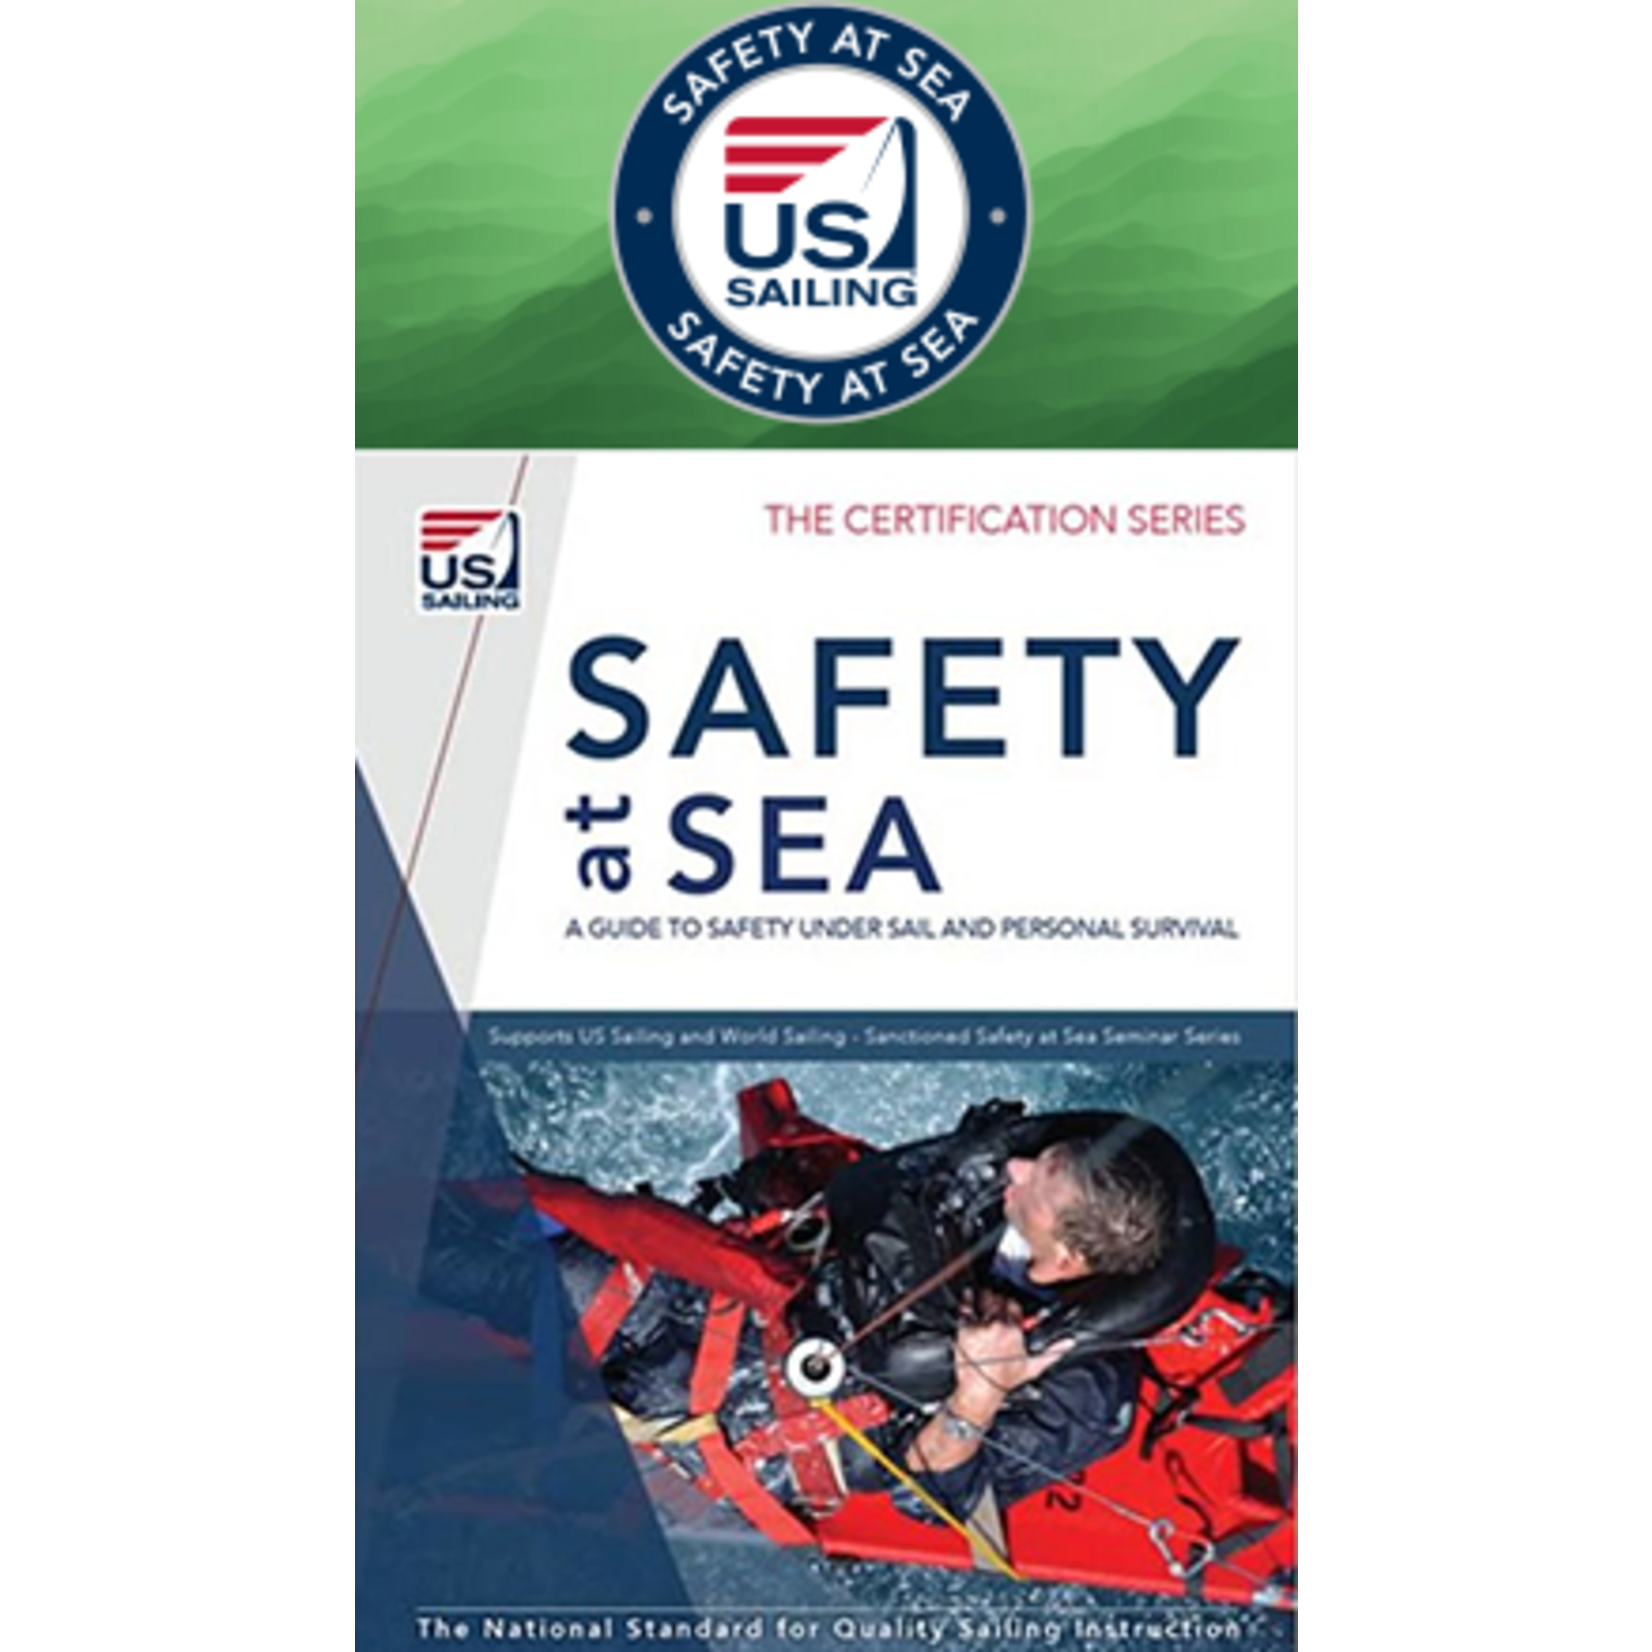 Safety at Sea: Coastal (Online) plus the Safety at Sea: A Guide to Safety Under Sail and Personal Survival